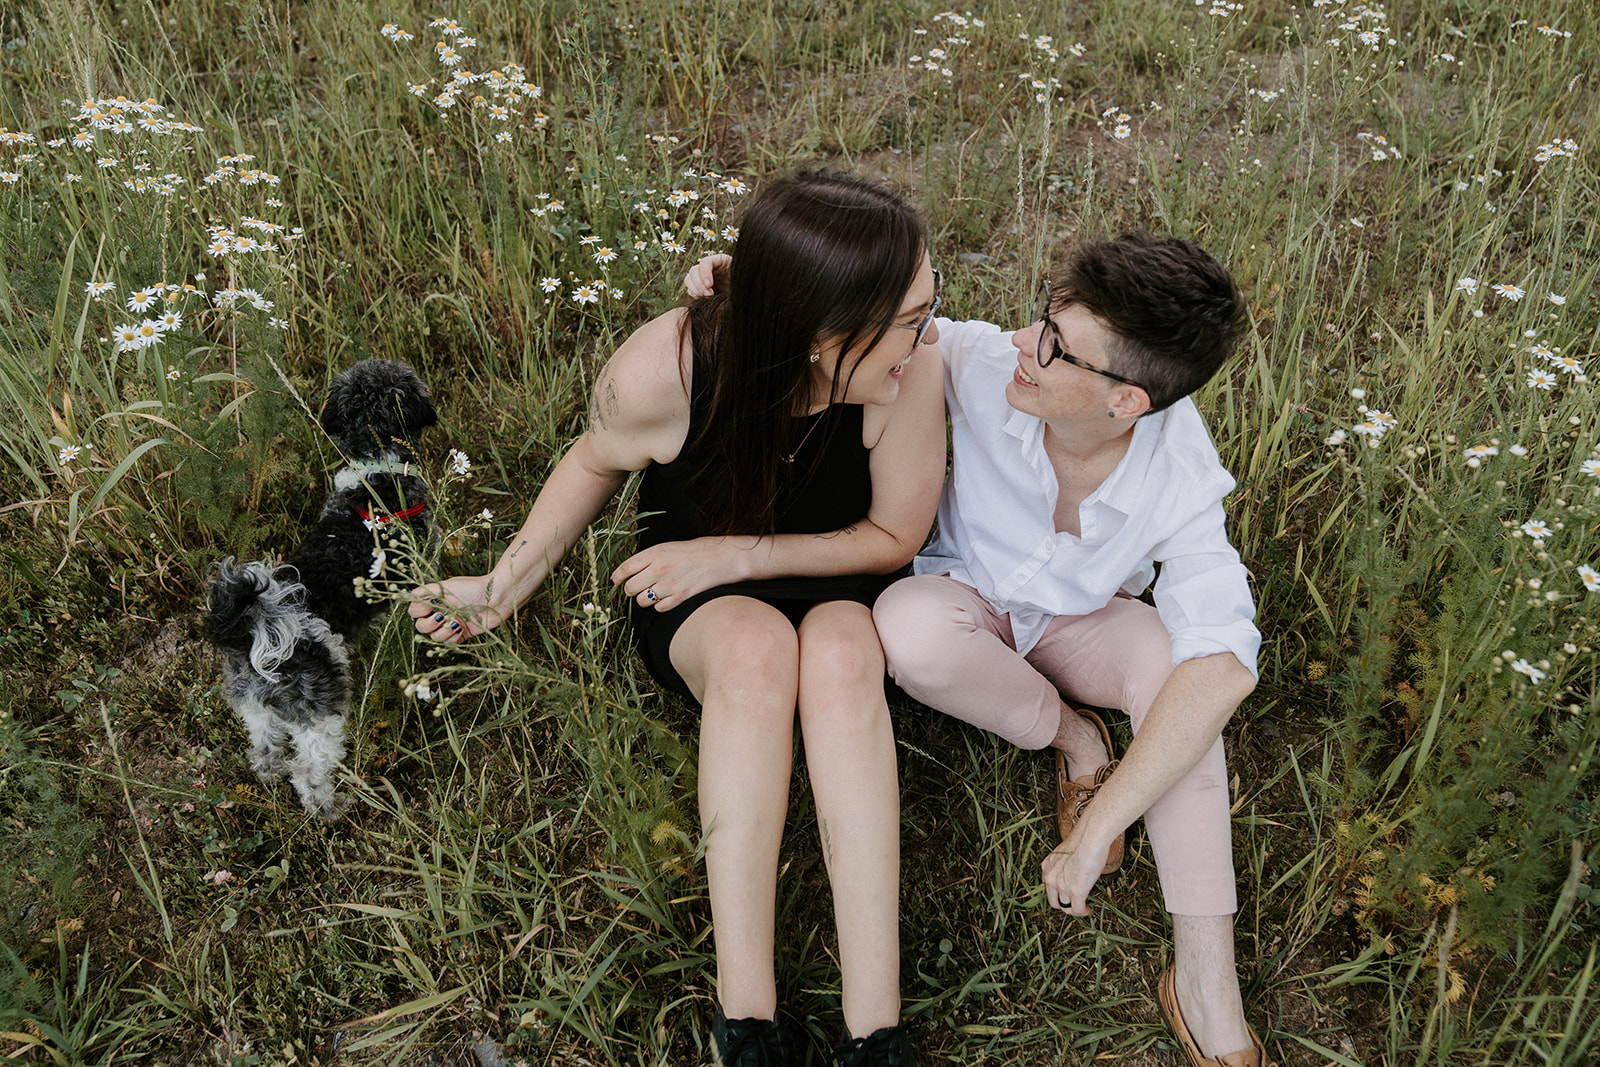 Two people sitting on the grass smiling at each other with the dog on the left.